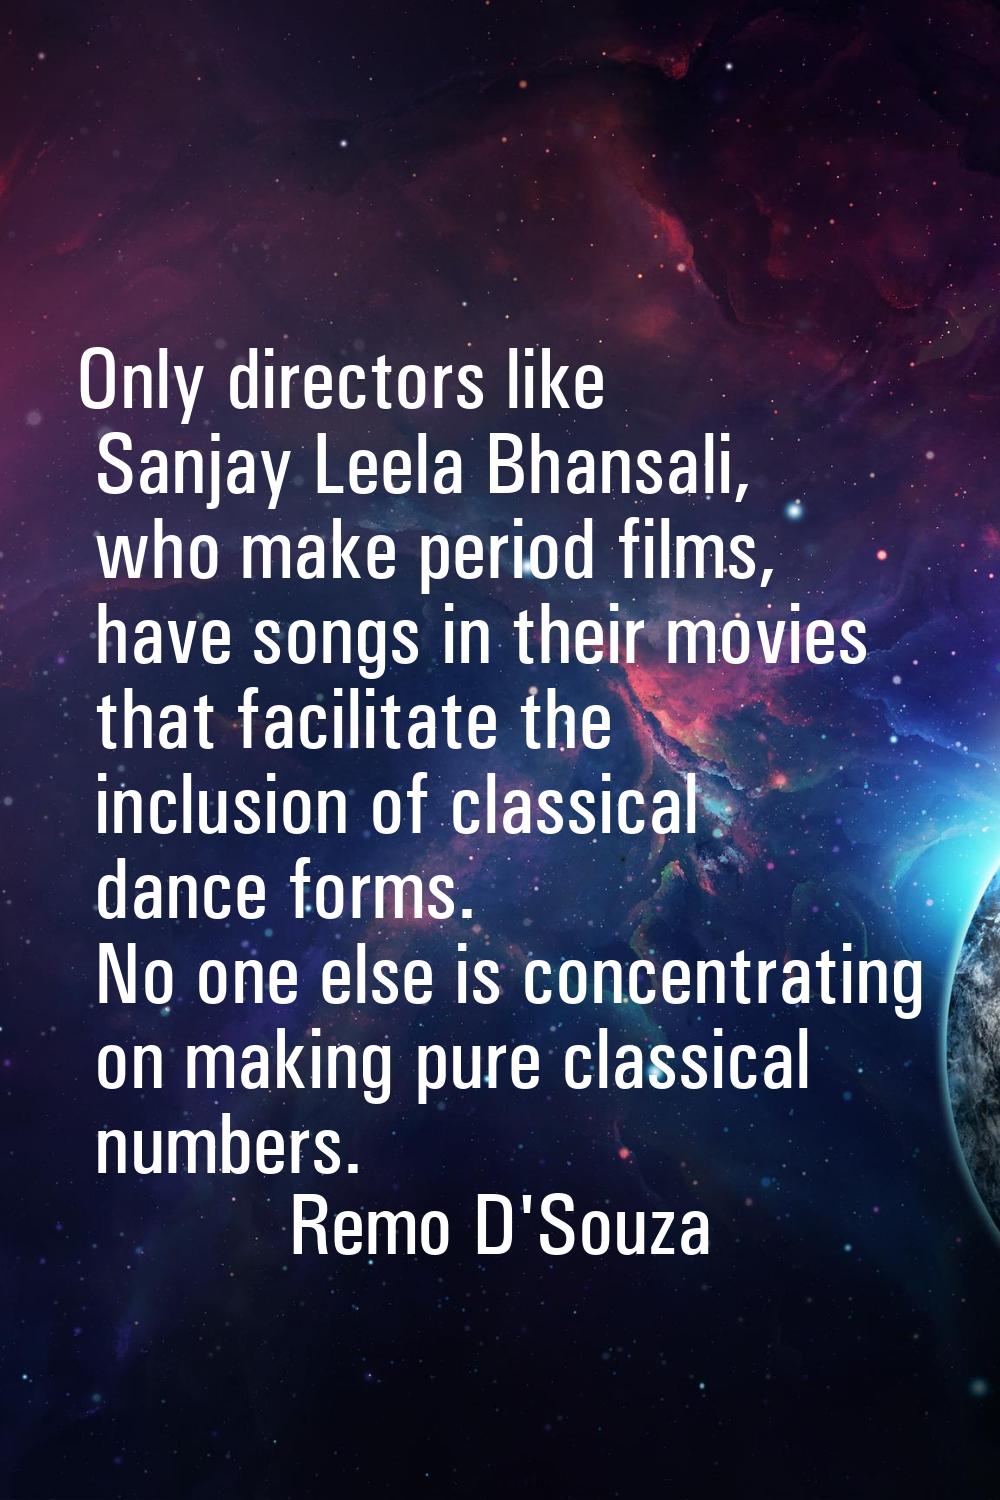 Only directors like Sanjay Leela Bhansali, who make period films, have songs in their movies that f